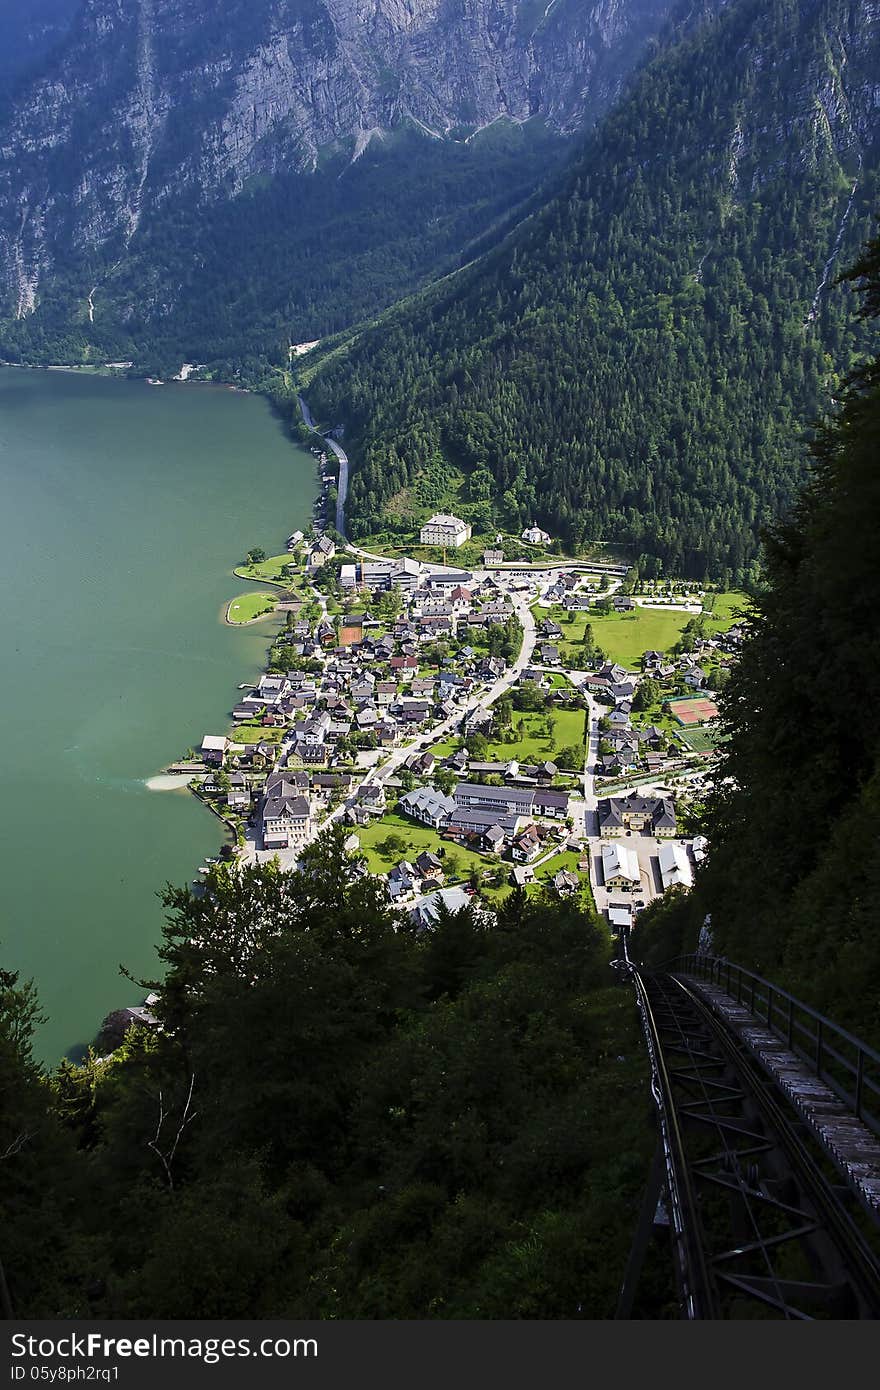 View from the top of the mountain through the railroad track down to the lake Hallstatt Austria